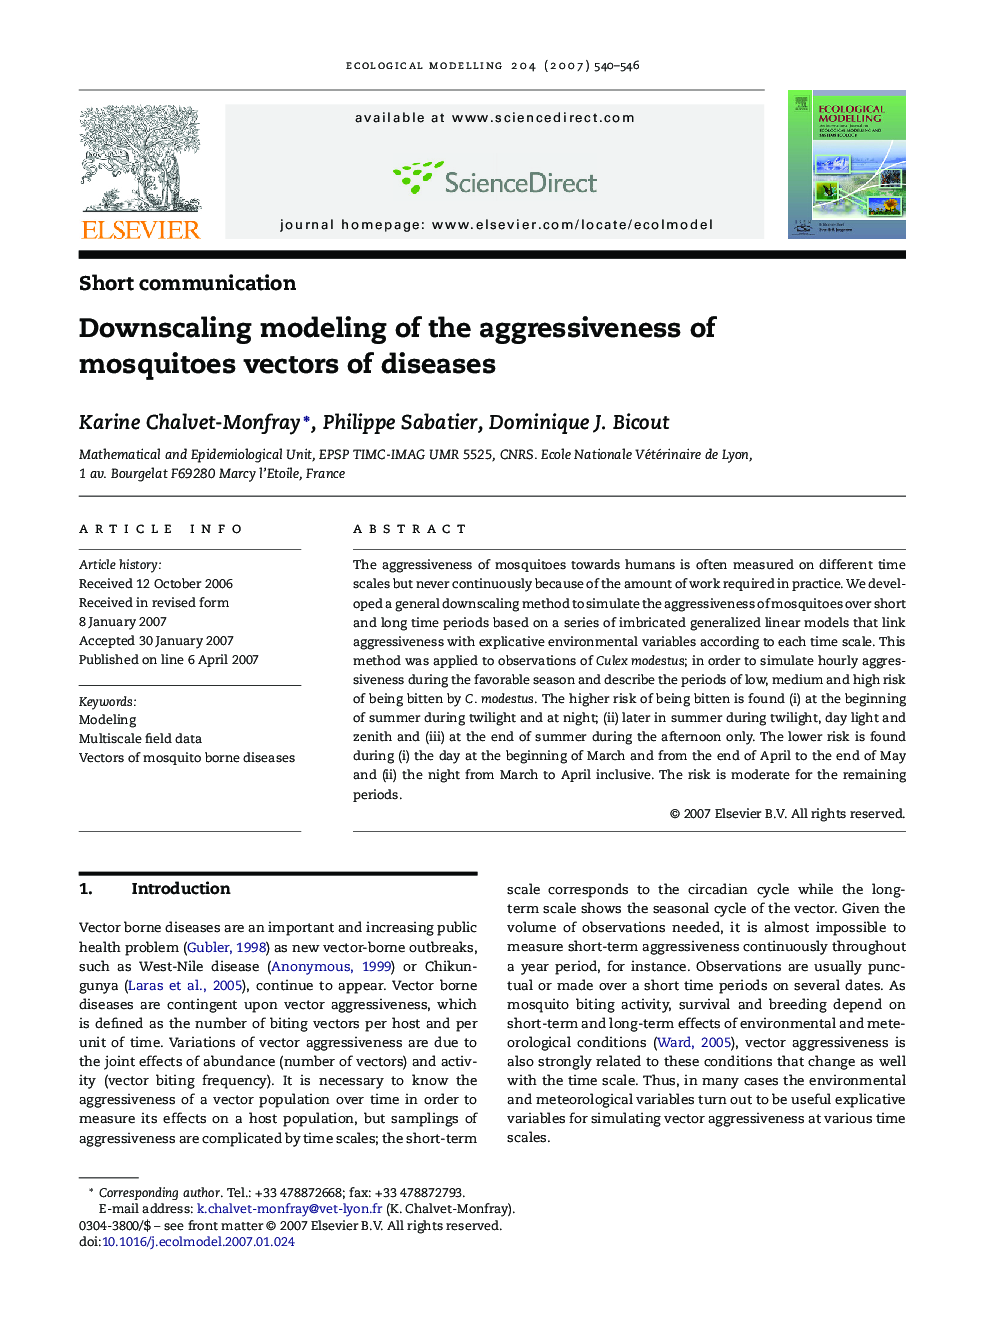 Downscaling modeling of the aggressiveness of mosquitoes vectors of diseases